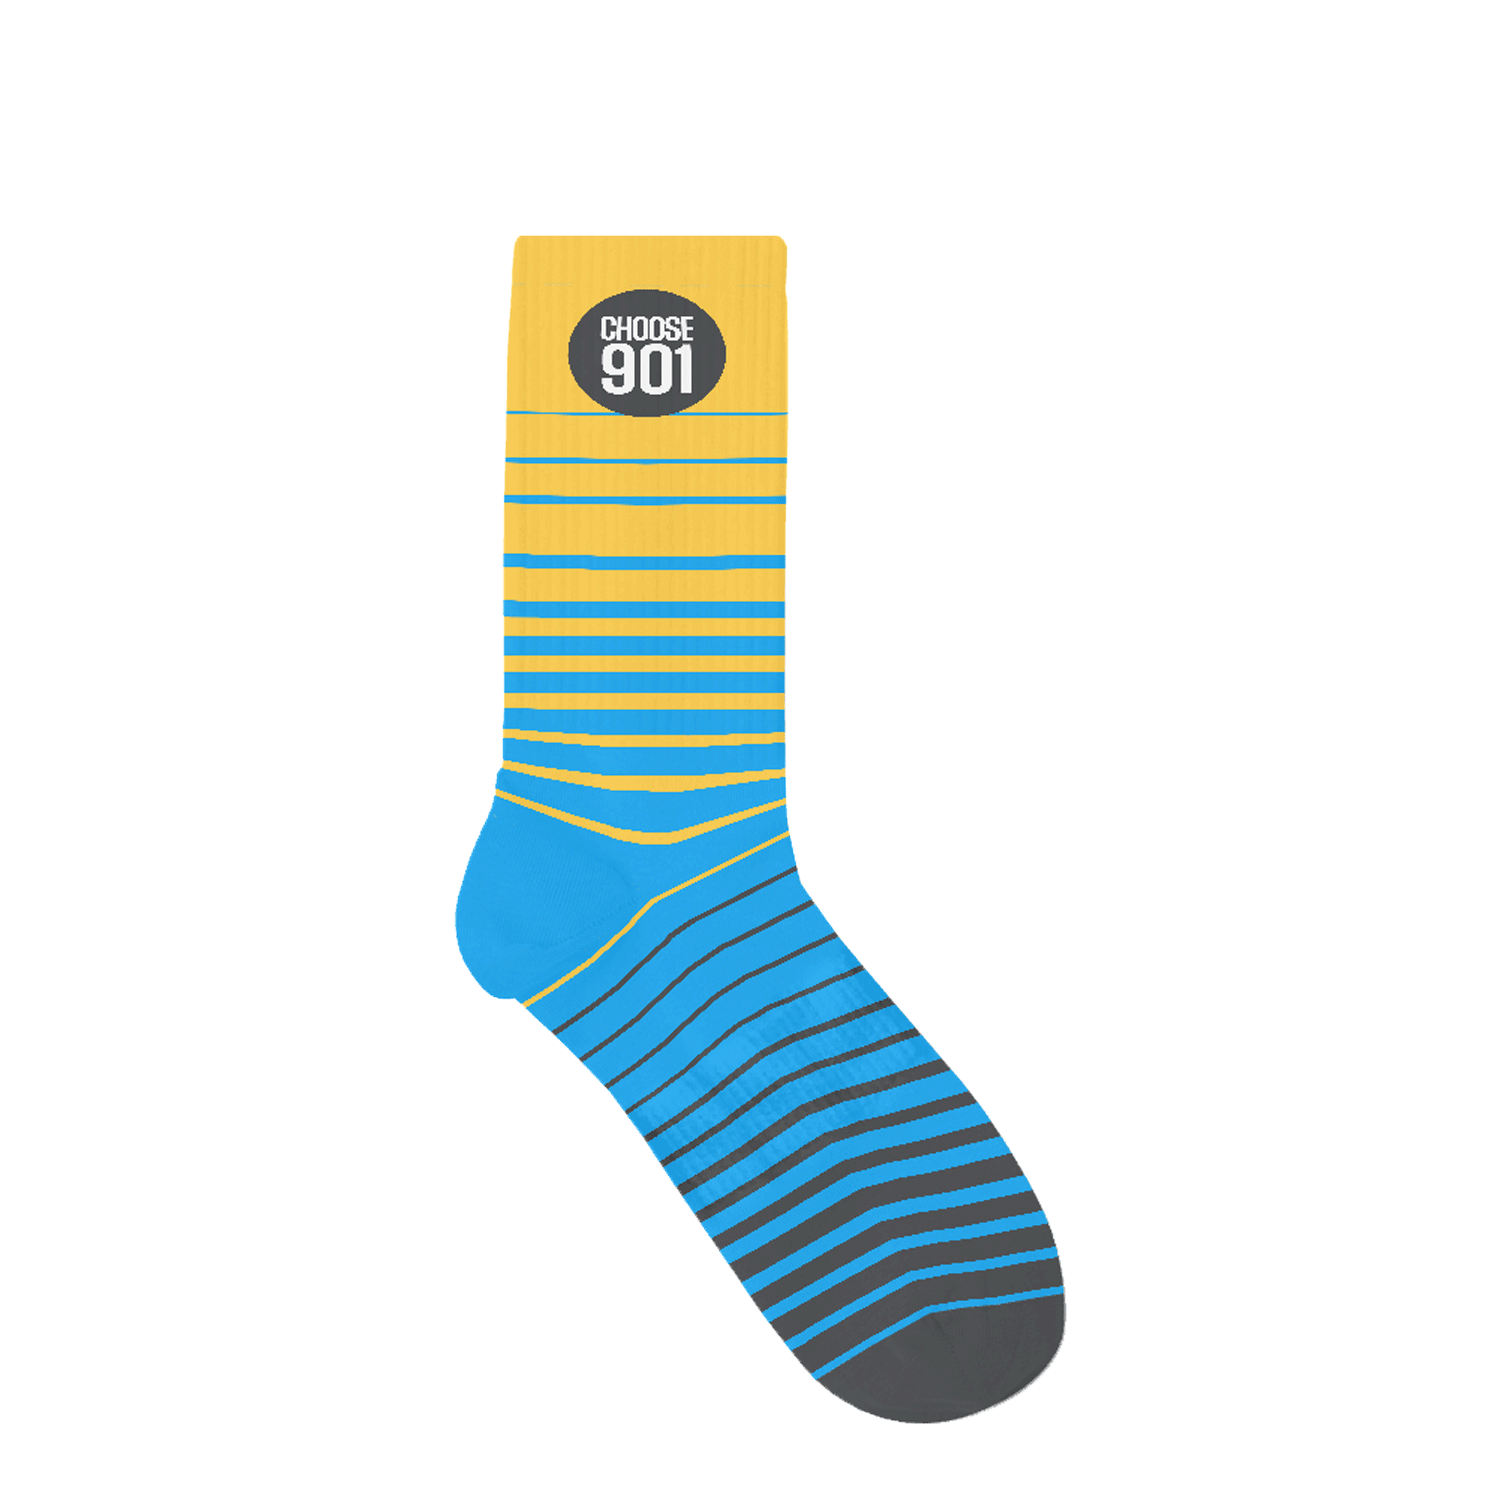 A blue and yellow striped Choose901 sock with "Choose901" text on the yellow cuff, celebrating Memphis.